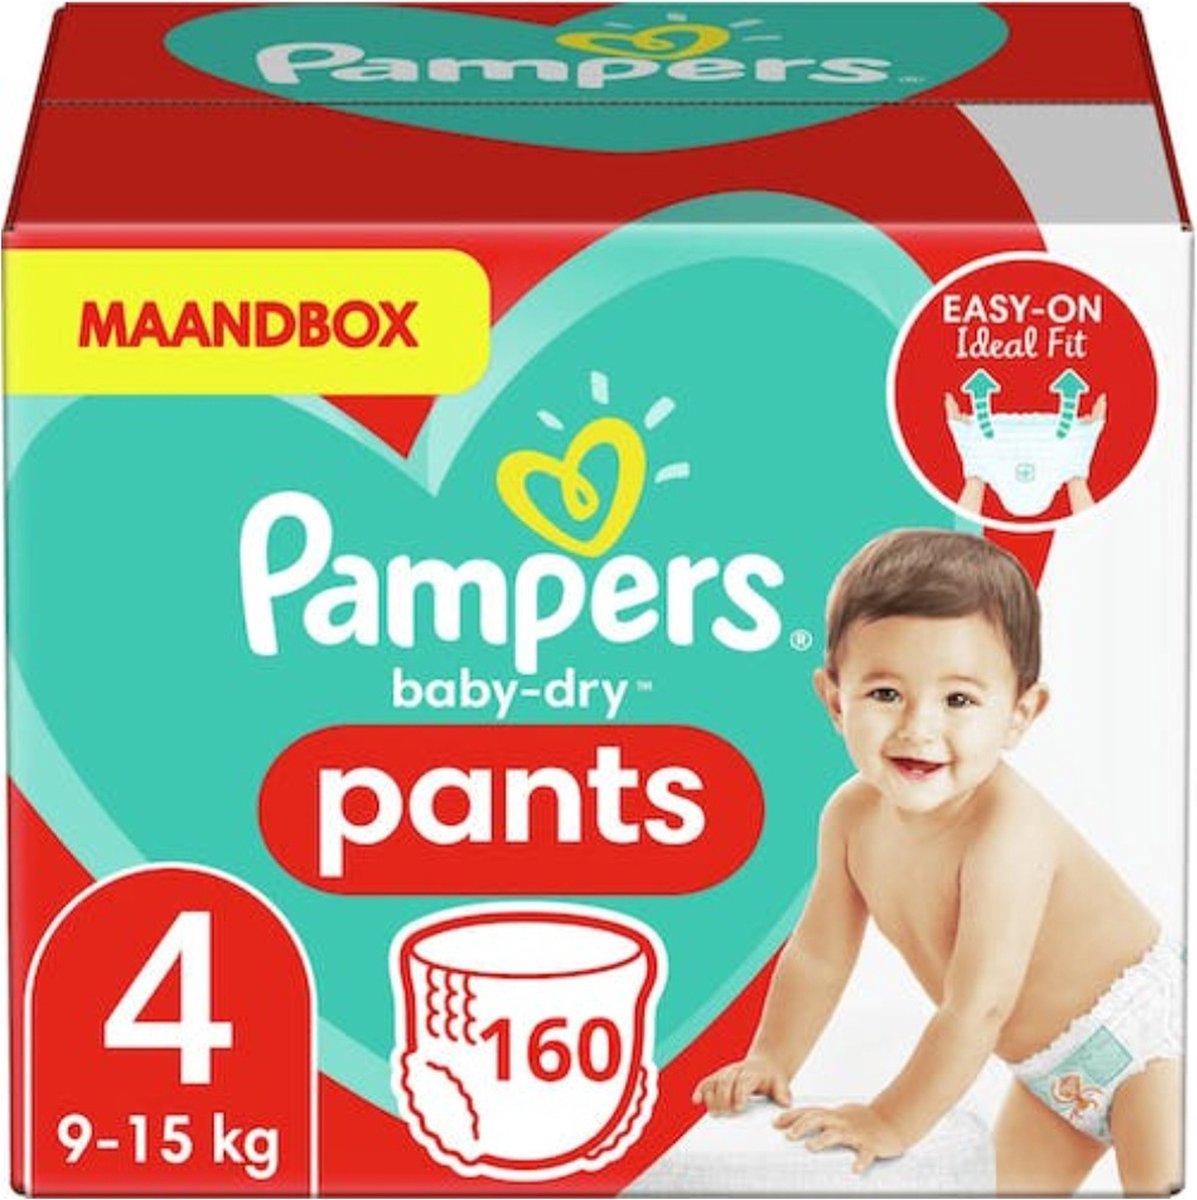 Pampers Couches de nuit Baby Dry Night Pants taille 5 